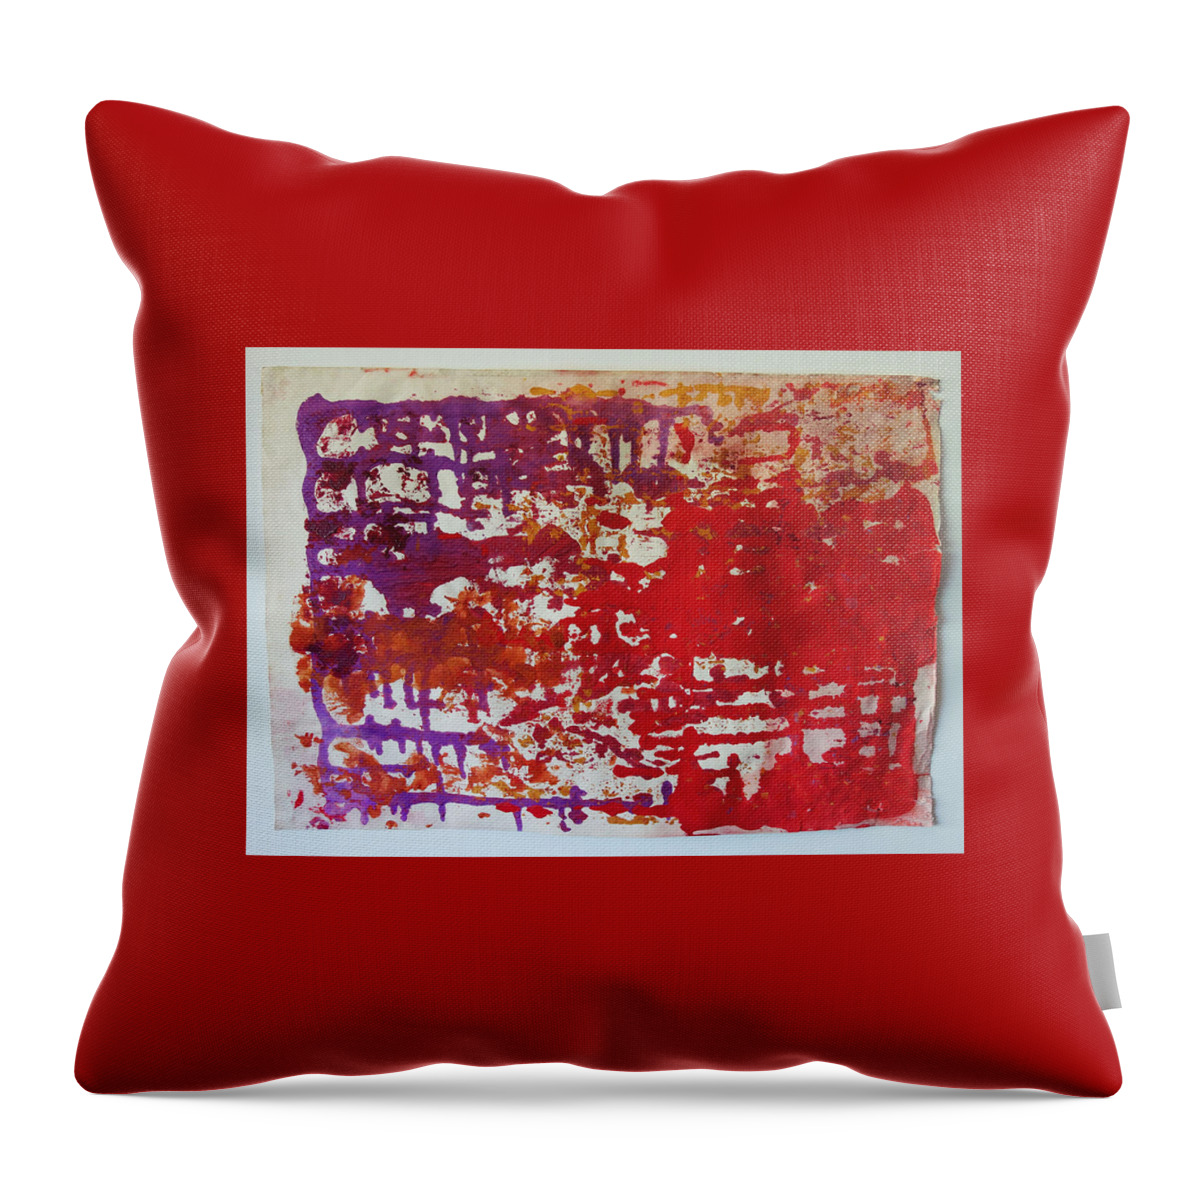  Throw Pillow featuring the painting Caos 03 by Giuseppe Monti